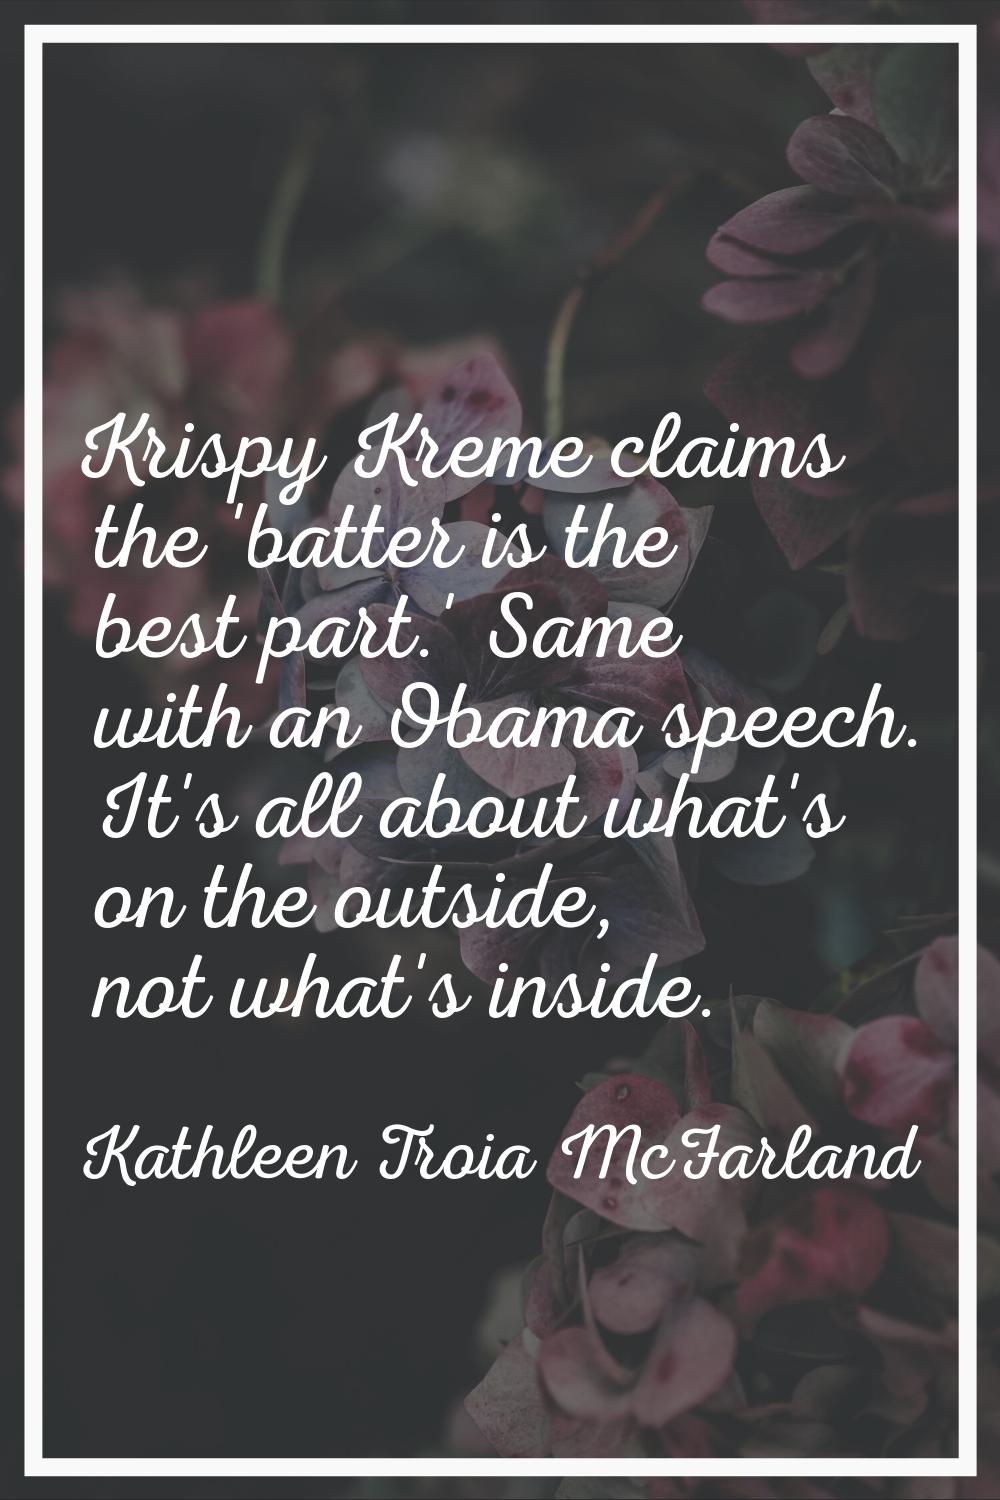 Krispy Kreme claims the 'batter is the best part.' Same with an Obama speech. It's all about what's